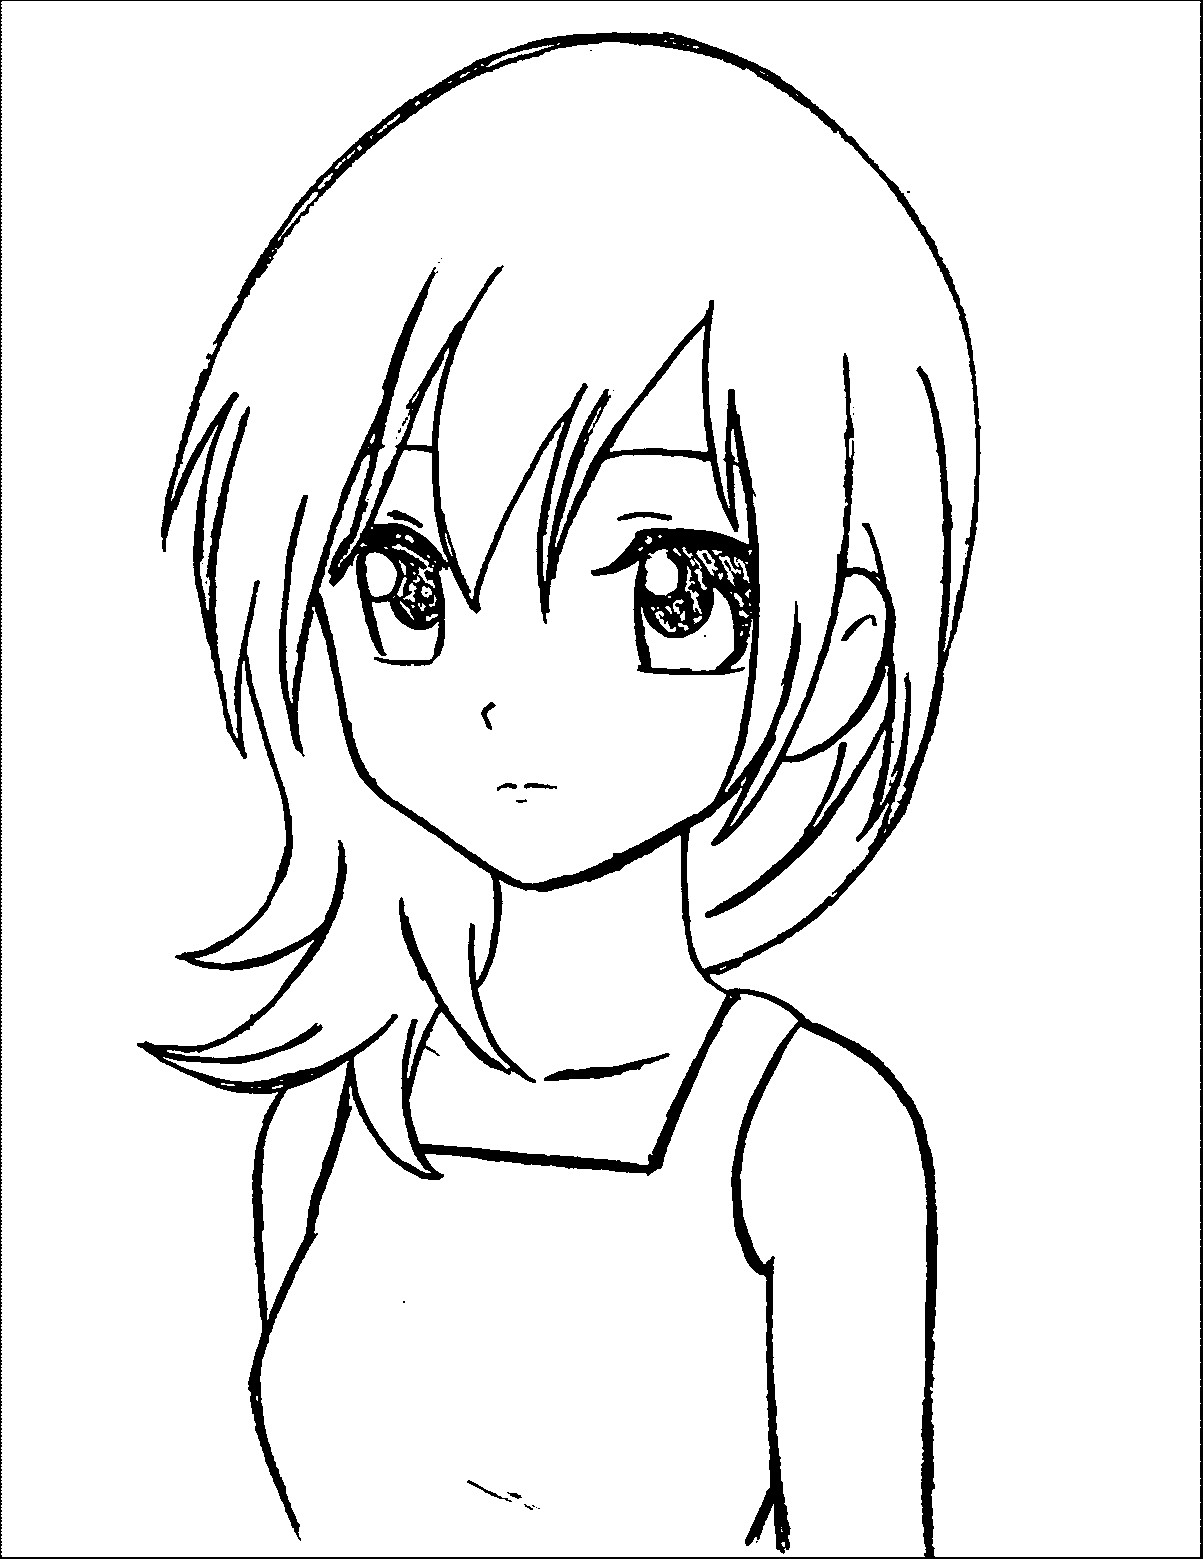 Coloring Pages Of Anime Girls
 Pin on wecoloringpage